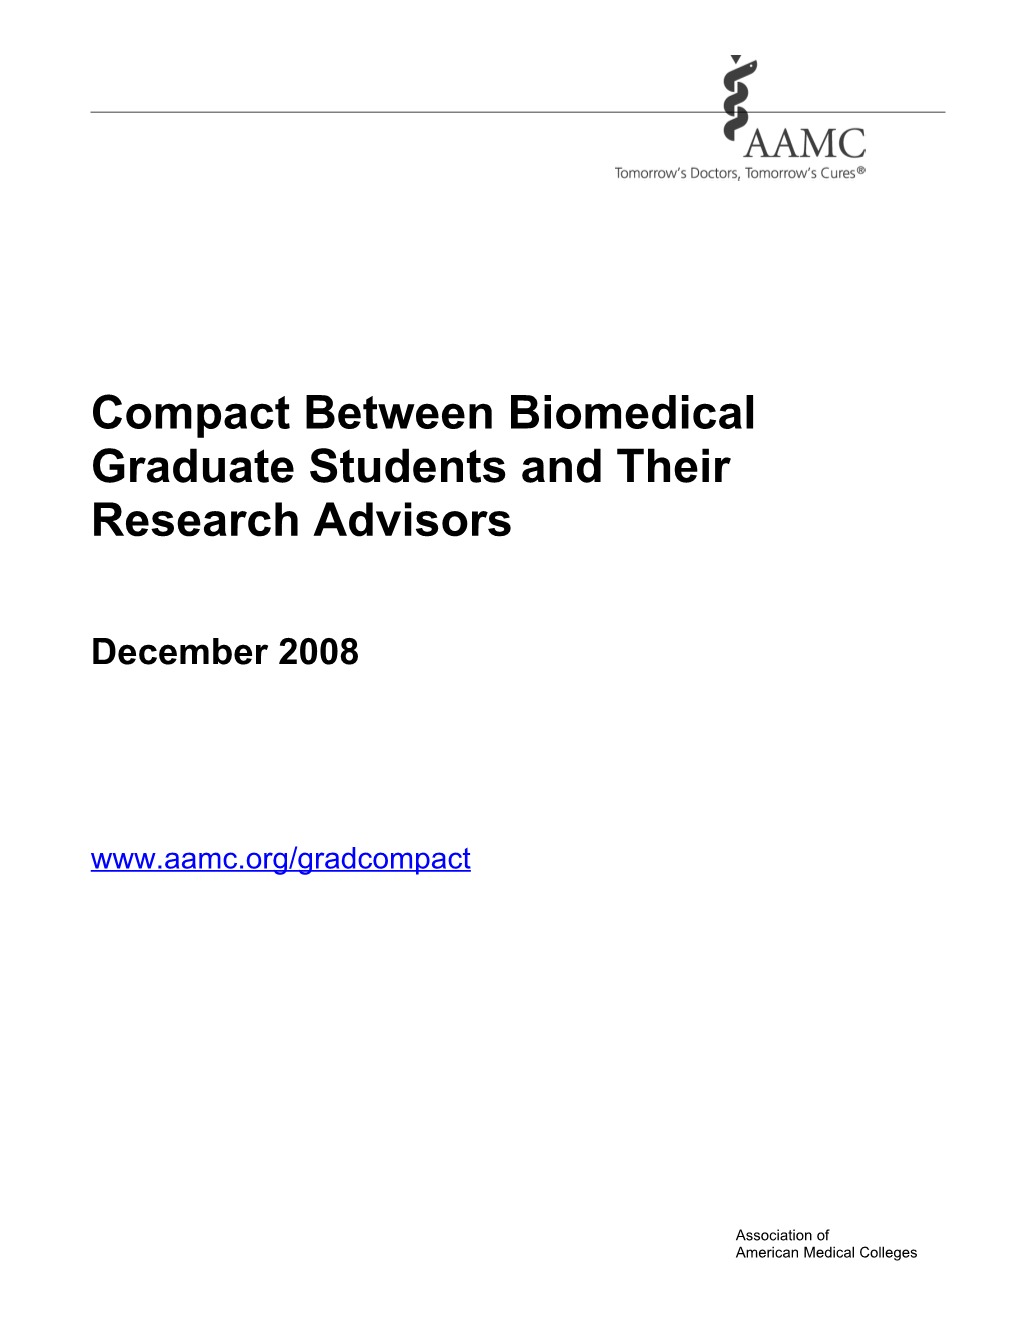 Compact Between Biomedical Graduate Students and Their Research Advisors